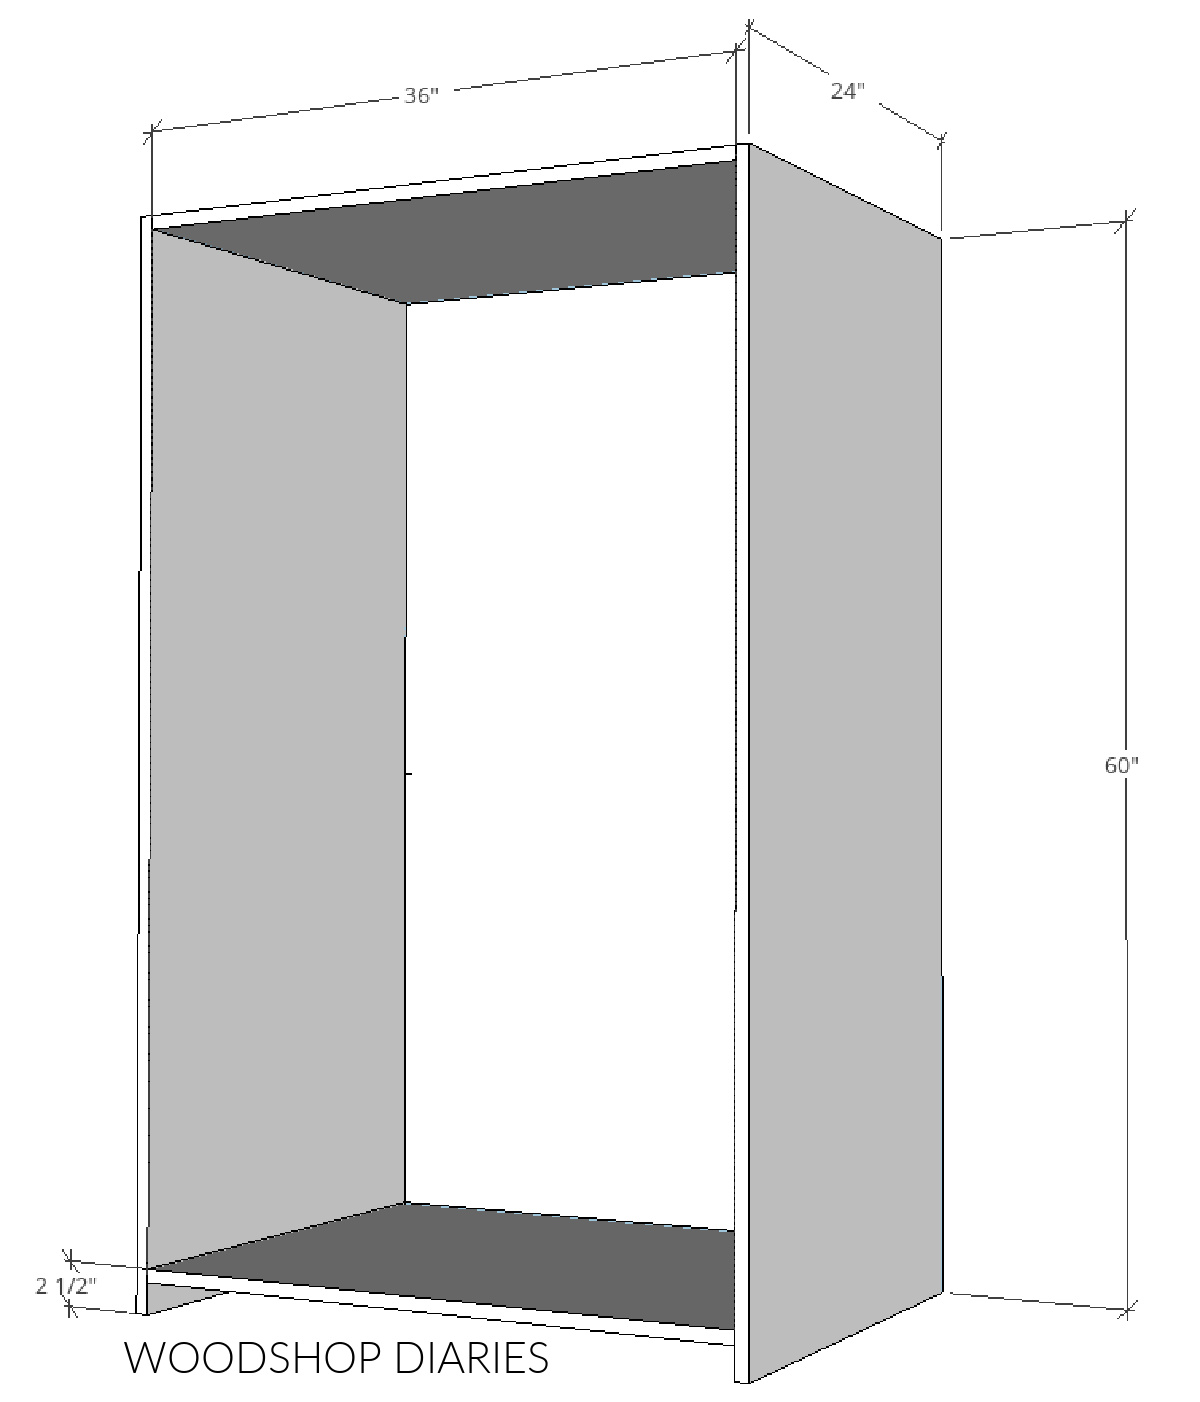 dimensional diagram showing how to assemble armoire cabinet box